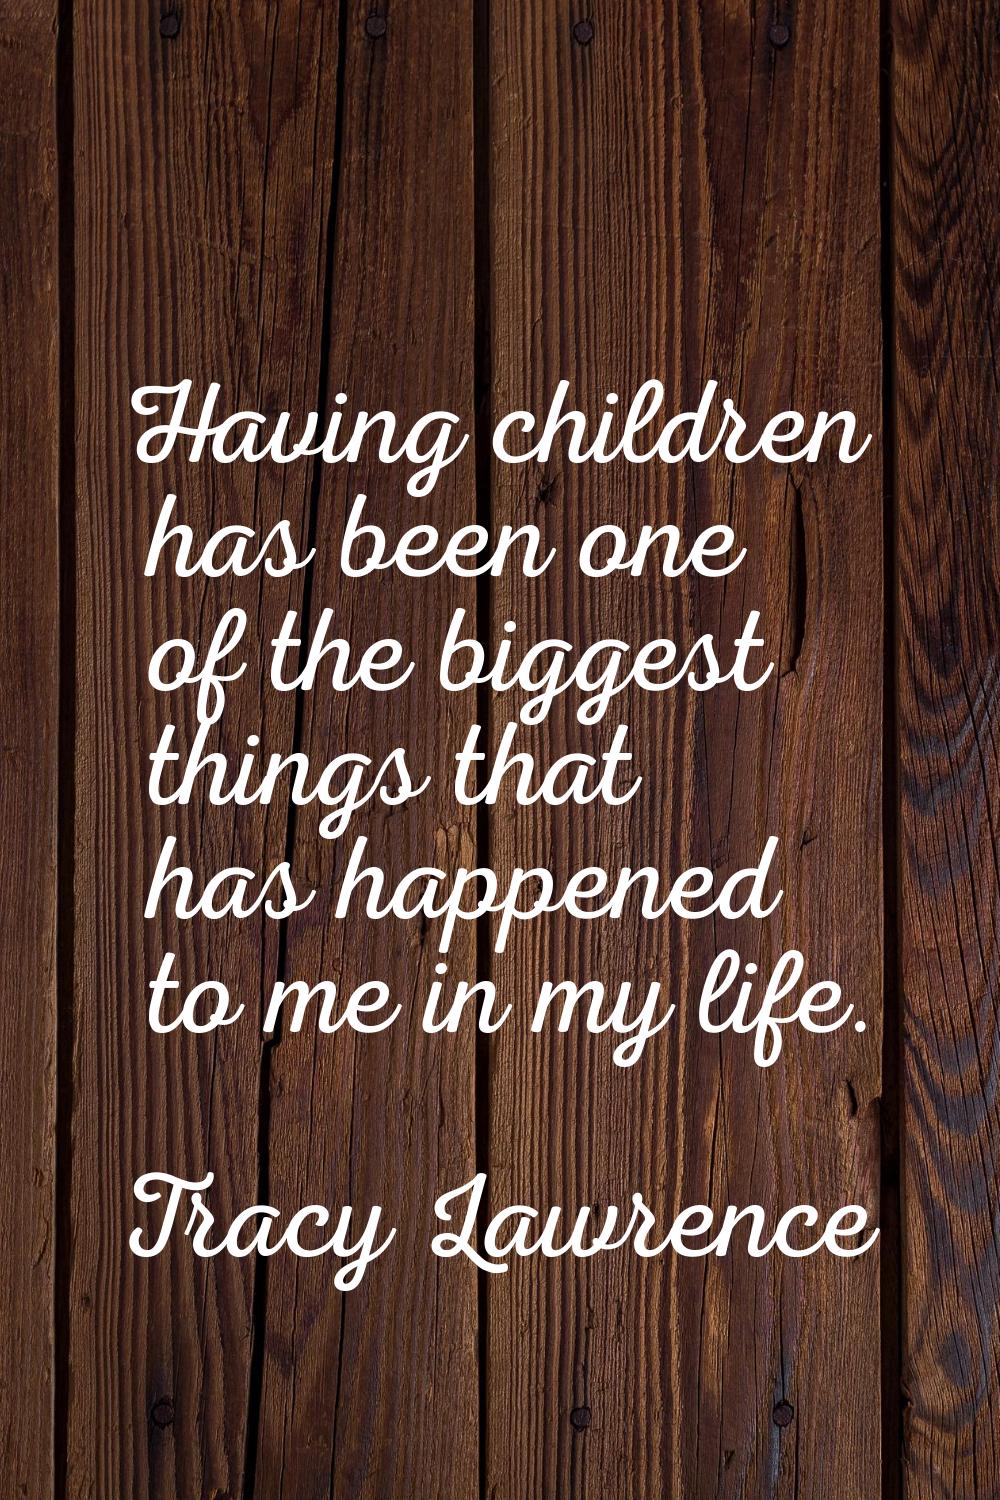 Having children has been one of the biggest things that has happened to me in my life.